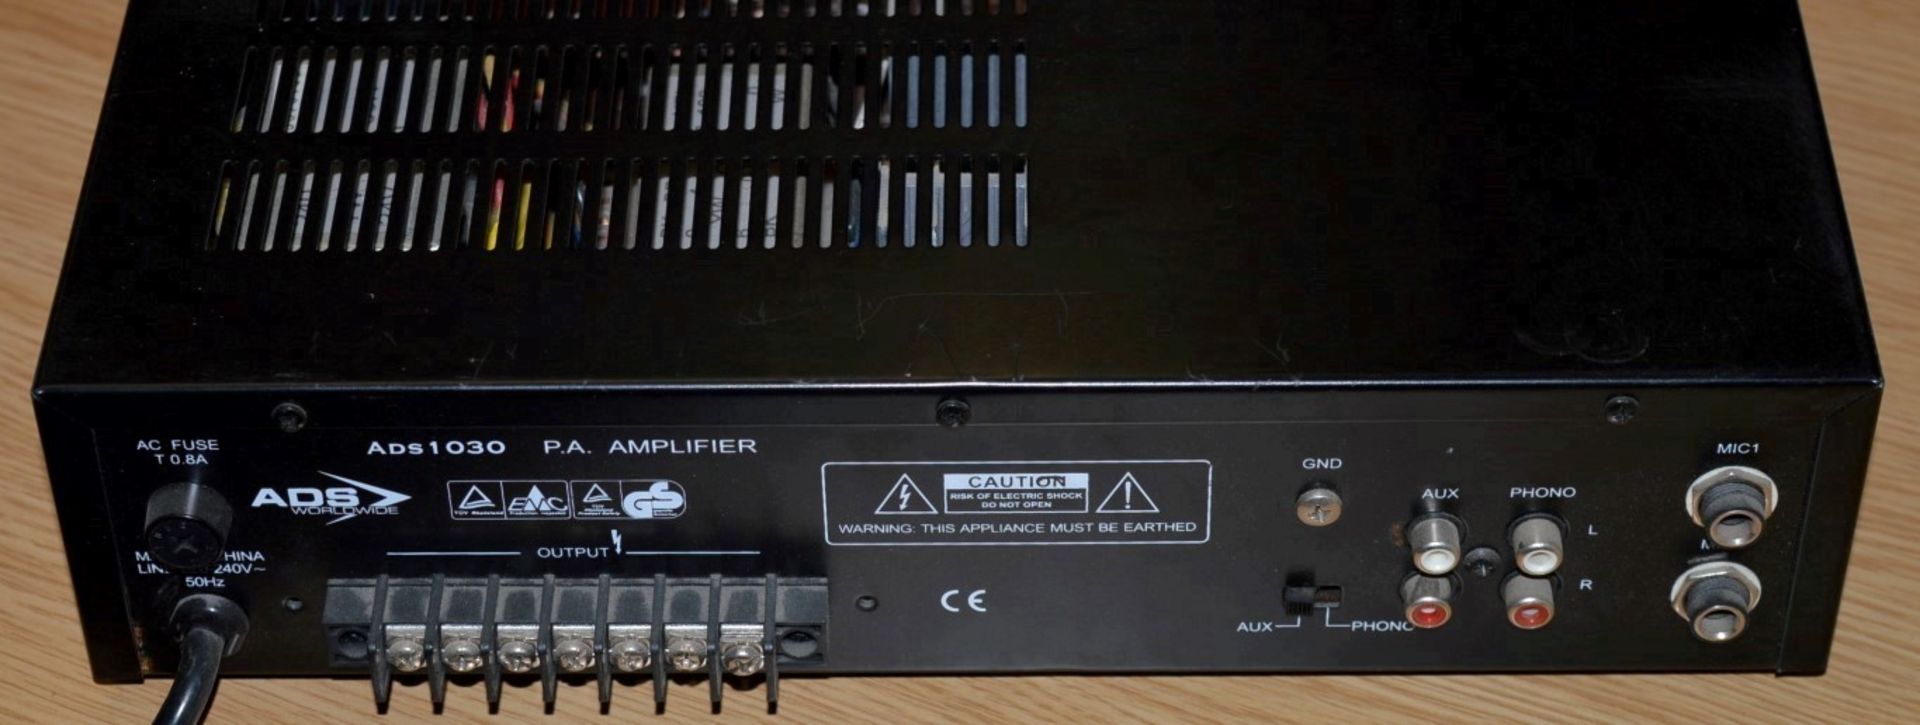 1 x ADS 1030 - 30W 100V PA Amplifier - Working Order - CL011 - Location: Altrincham WA14 - RRP £ - Image 2 of 3